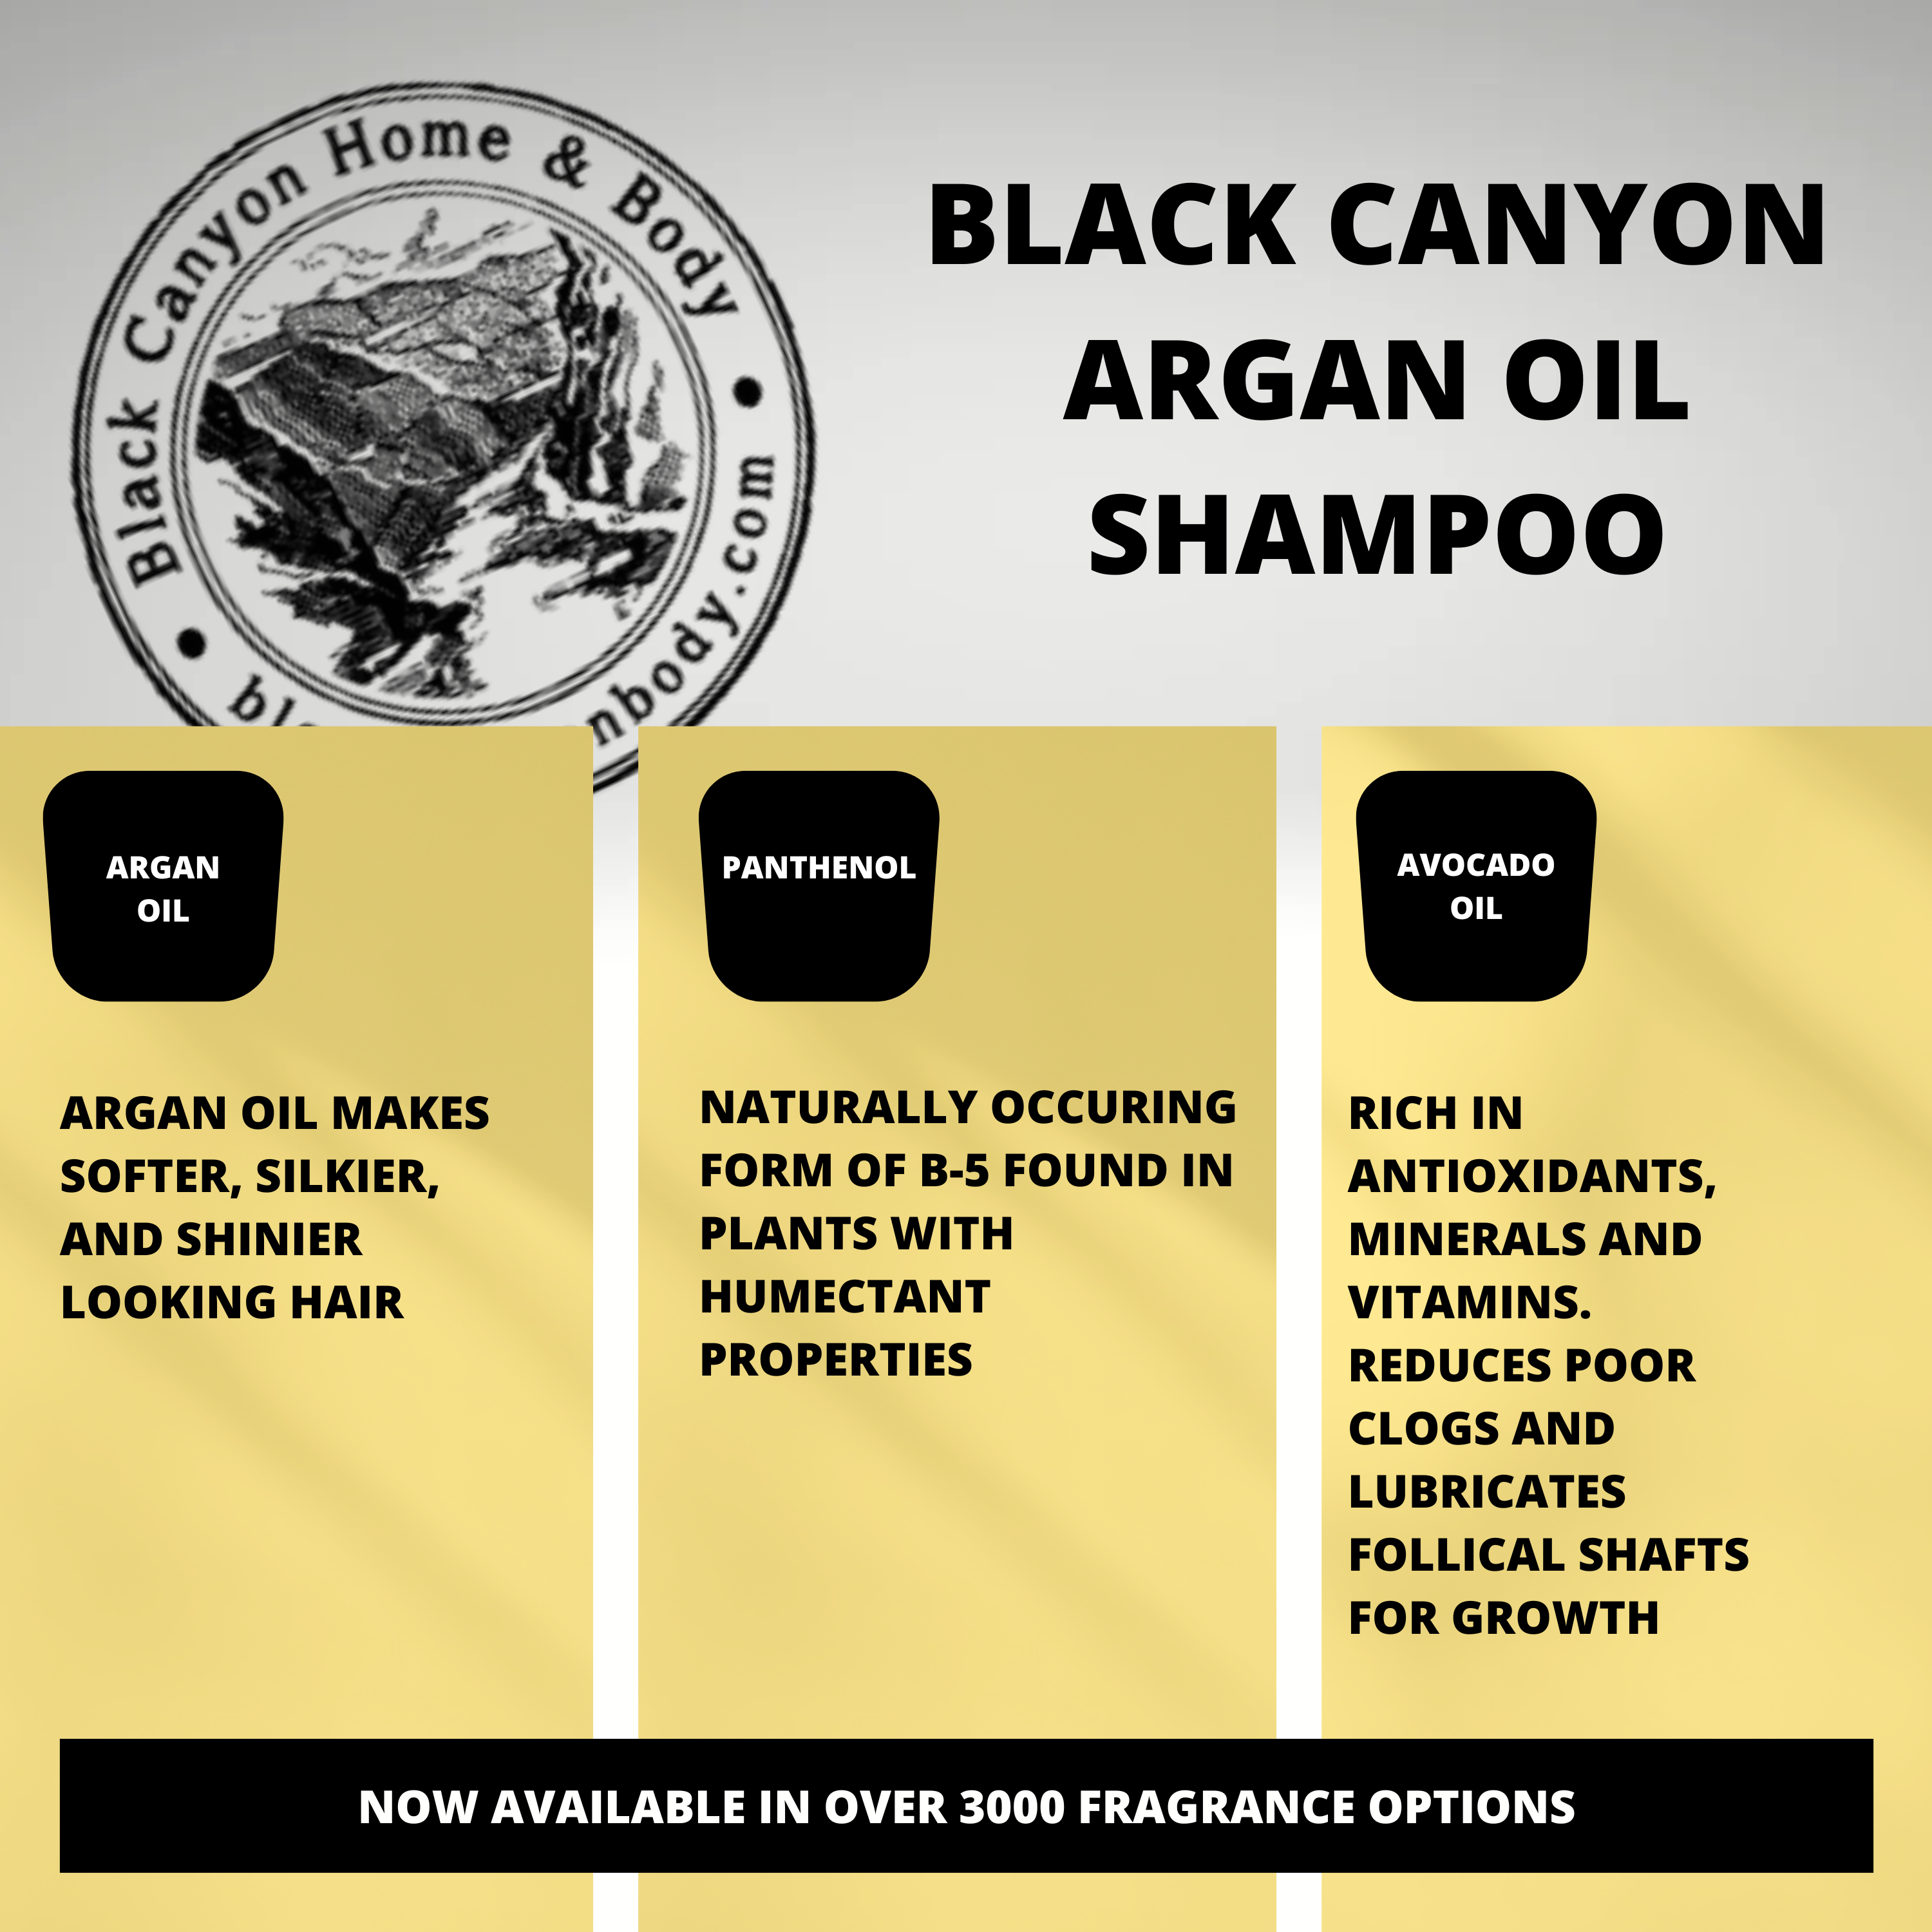 Black Canyon Sweet Cinnamon Vanilla Orchid Scented Shampoo with Argan Oil